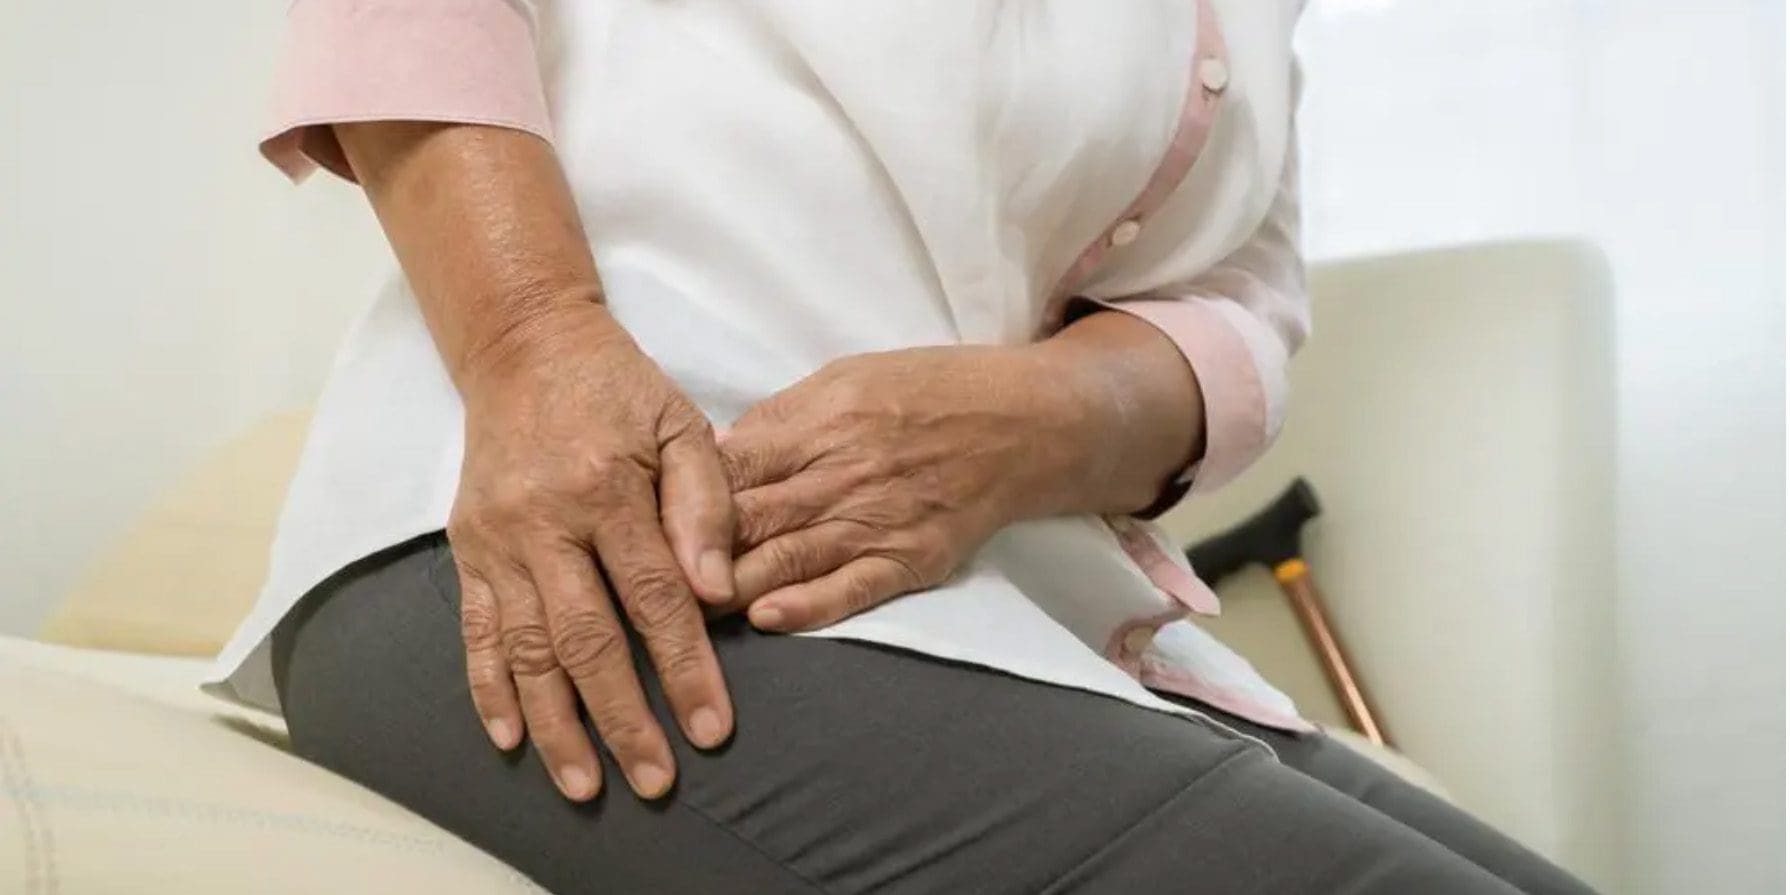 A woman is suffering from hip bursitis and is having mobility issues.